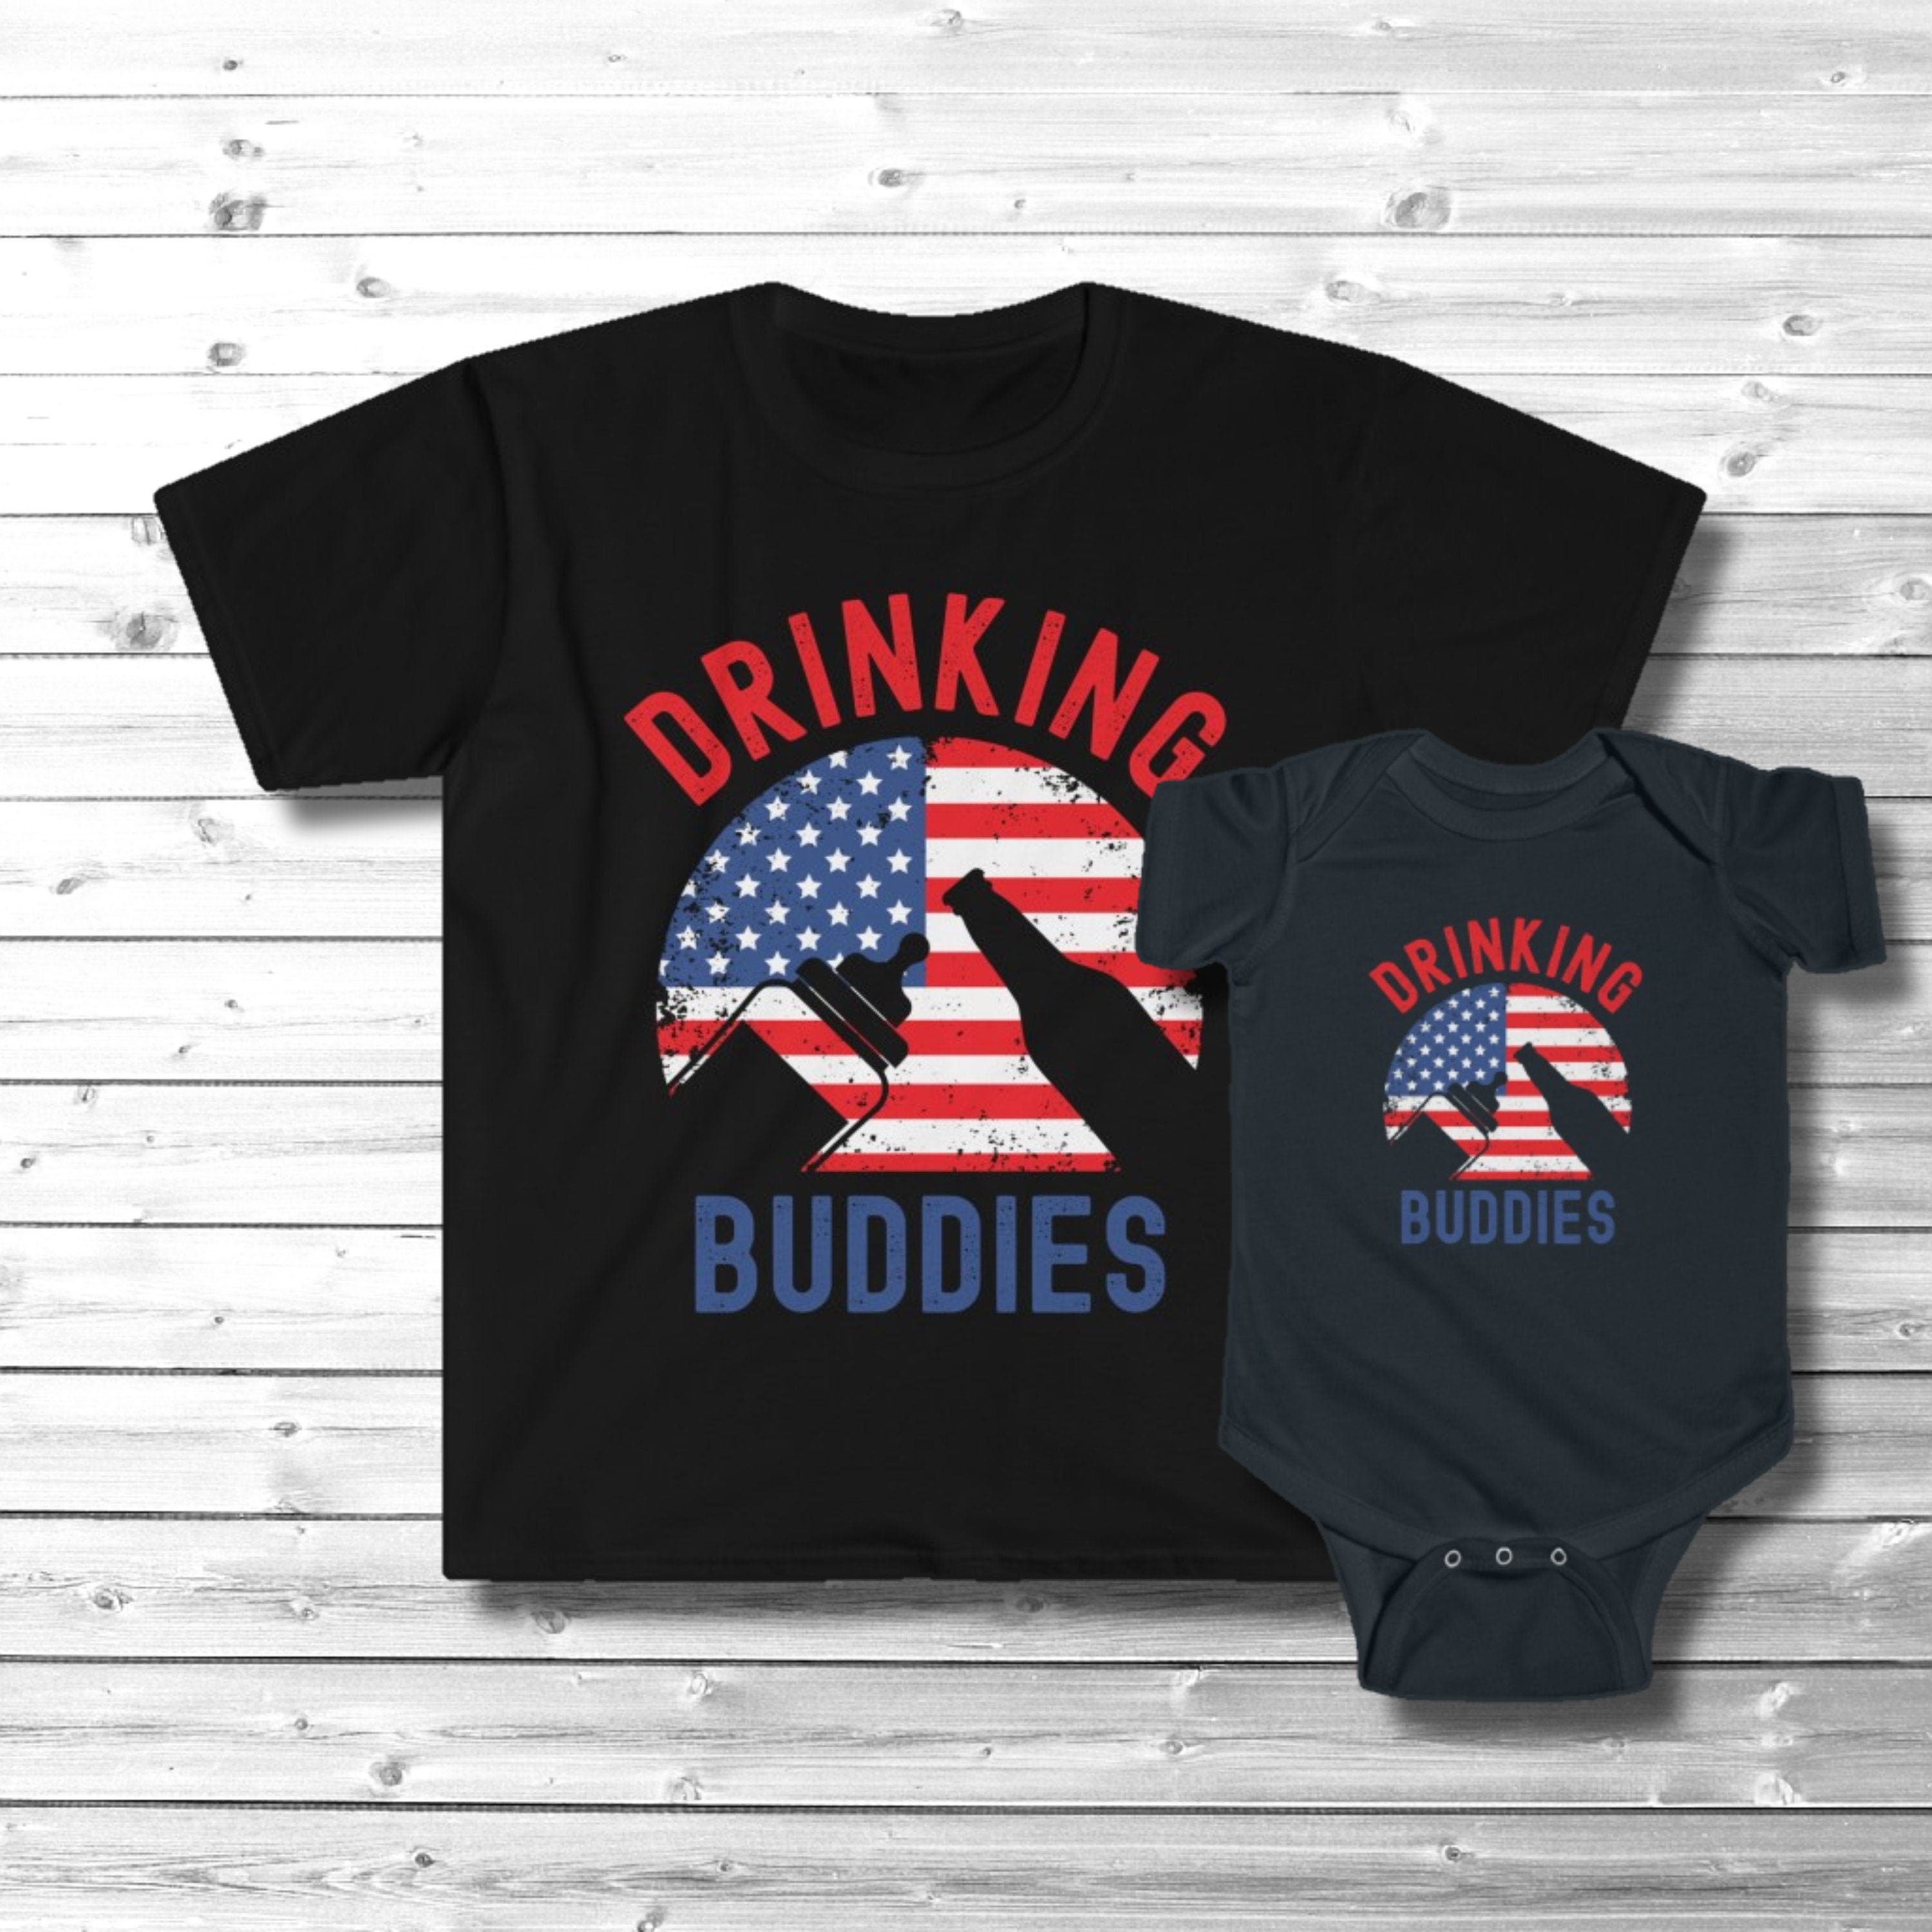 Independence Day Family TShirts Drinking Buddies Matching Shirts Daddy and Me July 4th Tees Baby 4th July Shirt